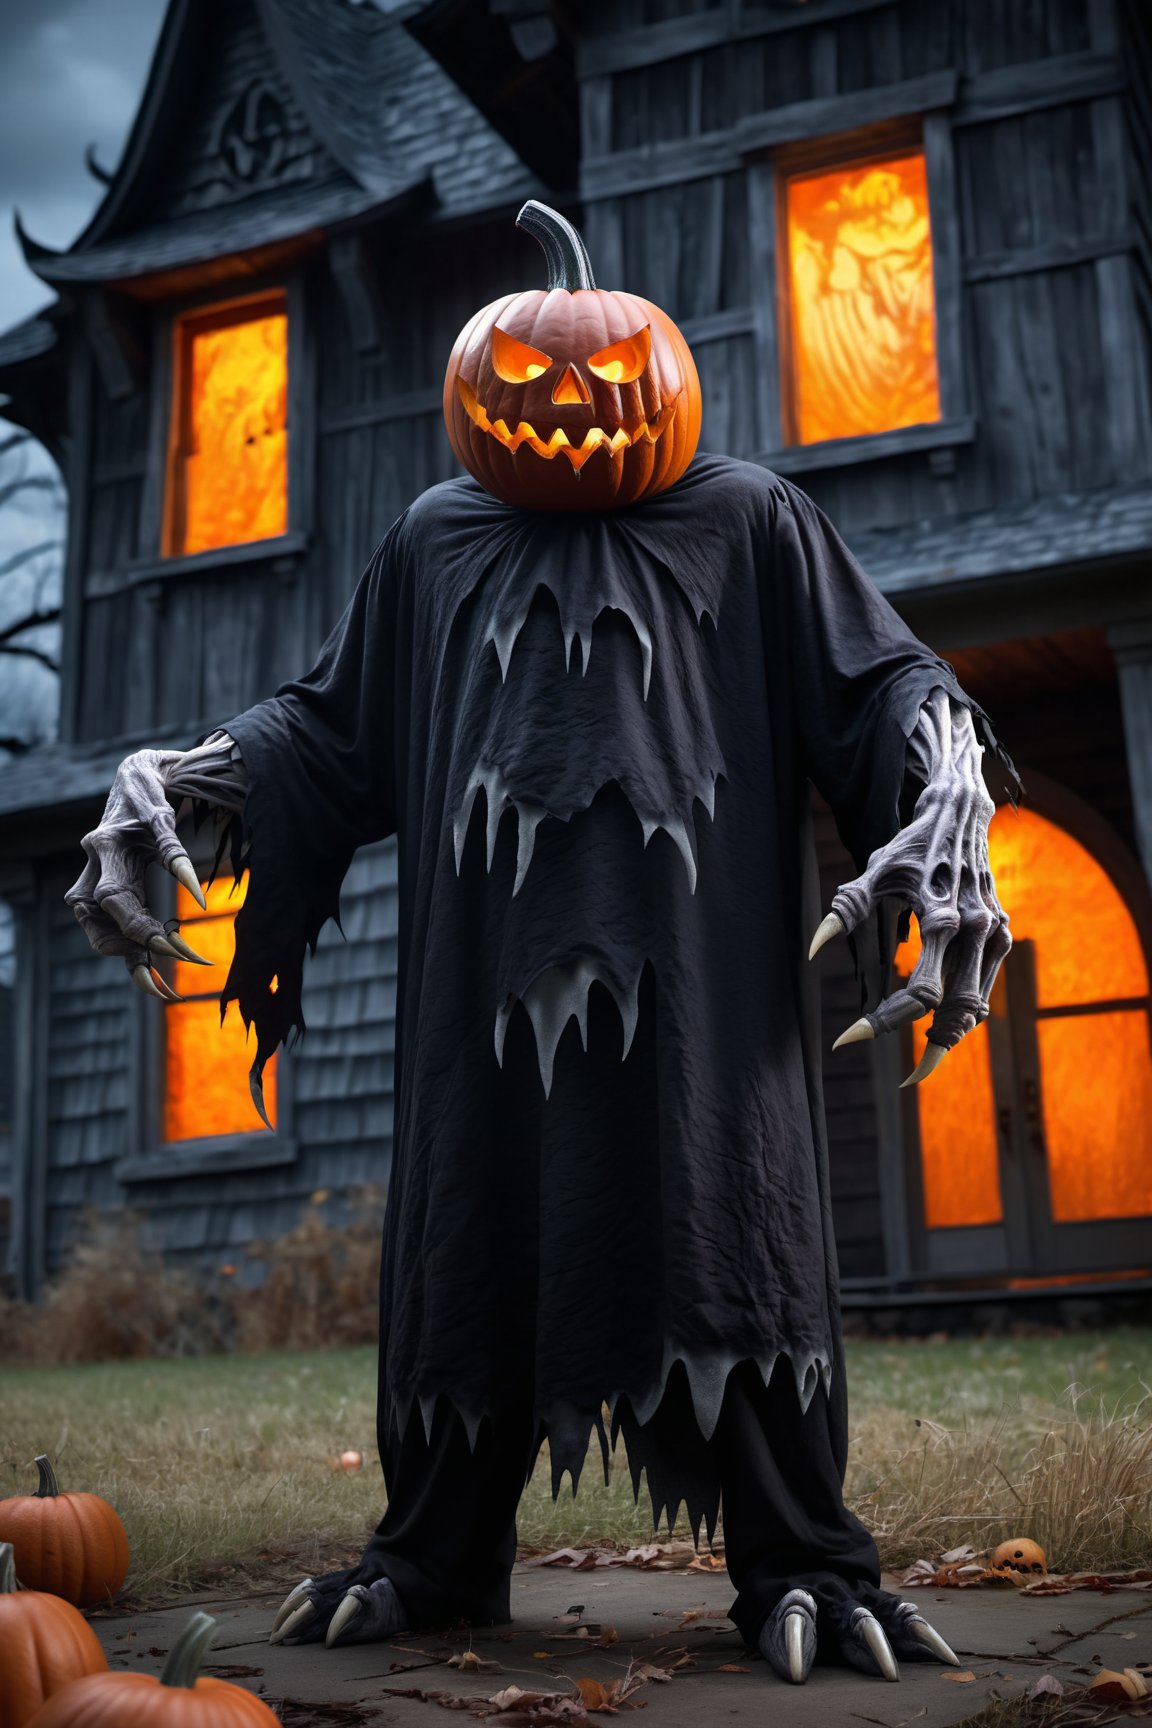 a menacing monster in a Halloween costume, lurking outside a haunting house, clutching a pumpkin in its gnarled claws. The monster's custom is a nightmarish creation, with tattered fabric, sharp fangs, and glowing eyes that pierce through the darkness. The haunting house looms behind, its weathered facade and broken windows adding to the eerie atmosphere. The pumpkin held by the monster is intricately carved with a wicked grin, its candlelight casting eerie shadows on the surroundings 
